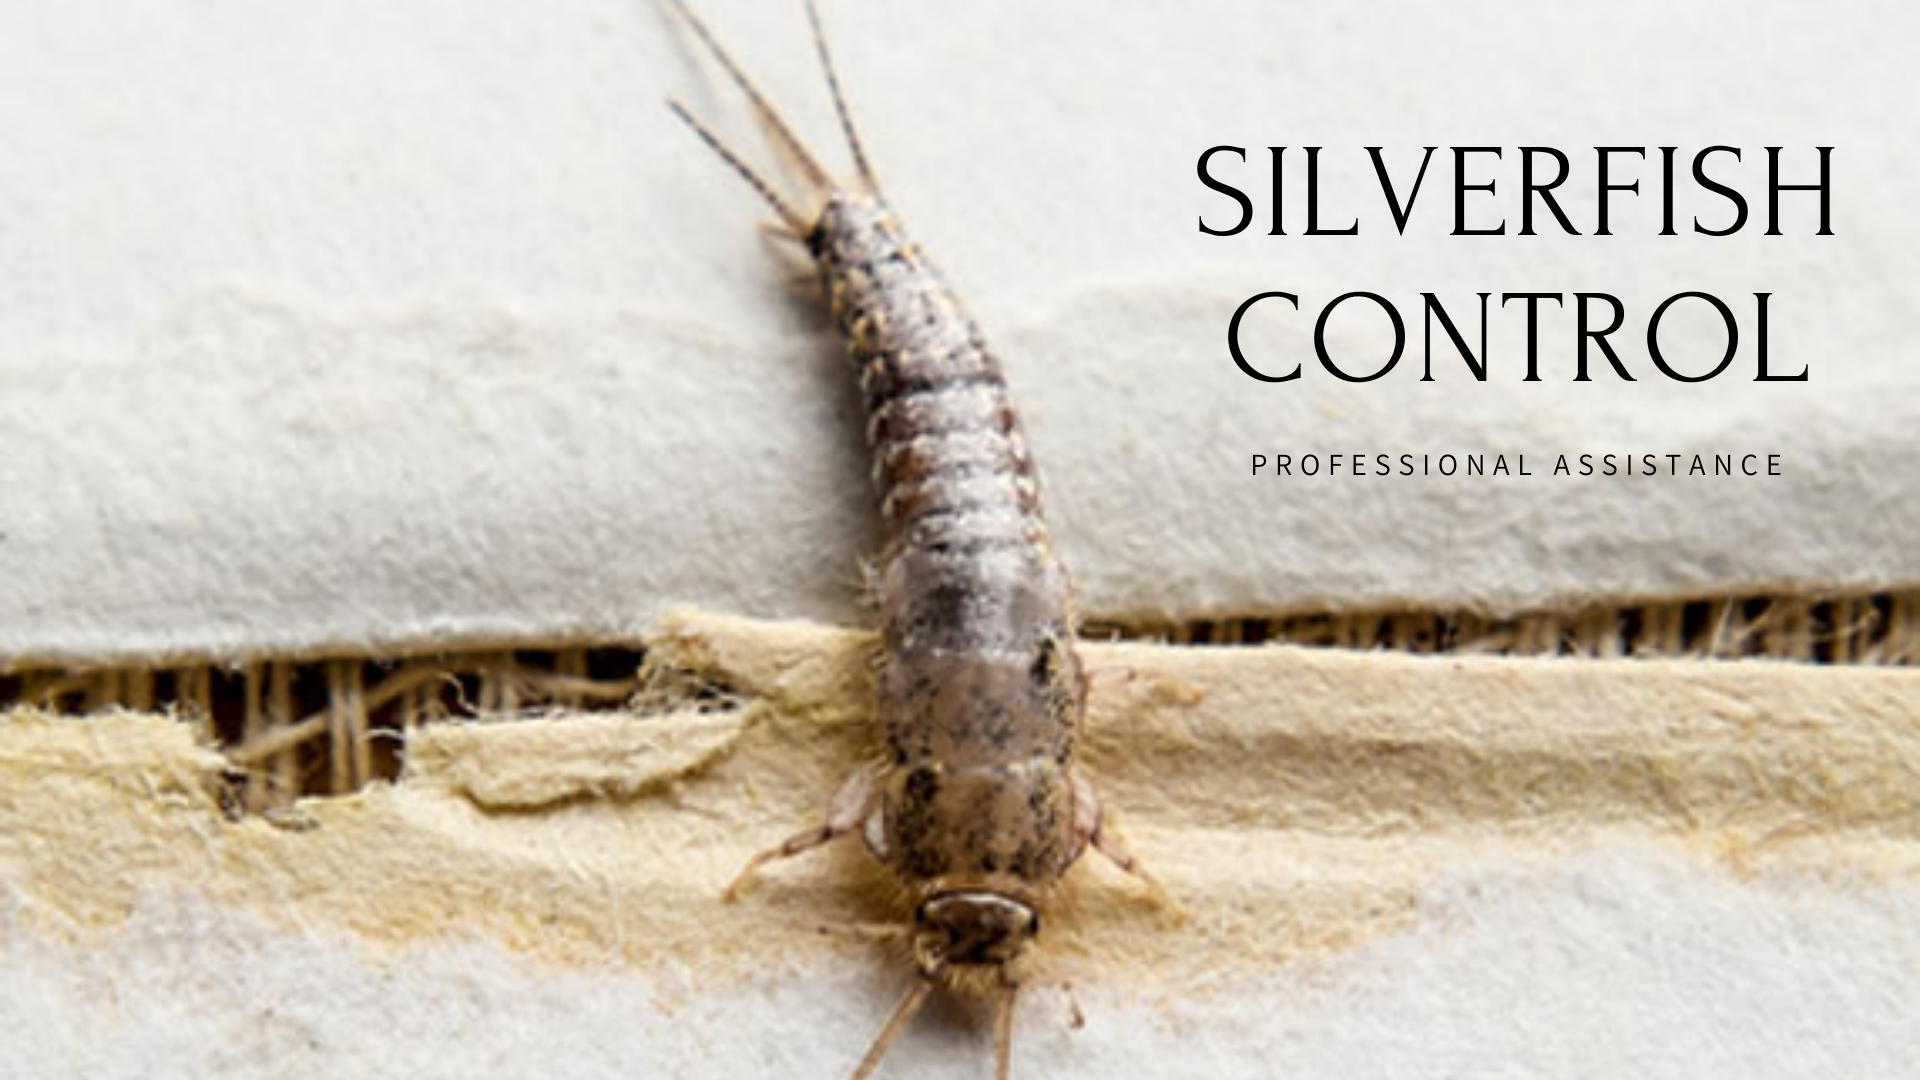 Why Call a Professional to Get Rid of Silverfish?